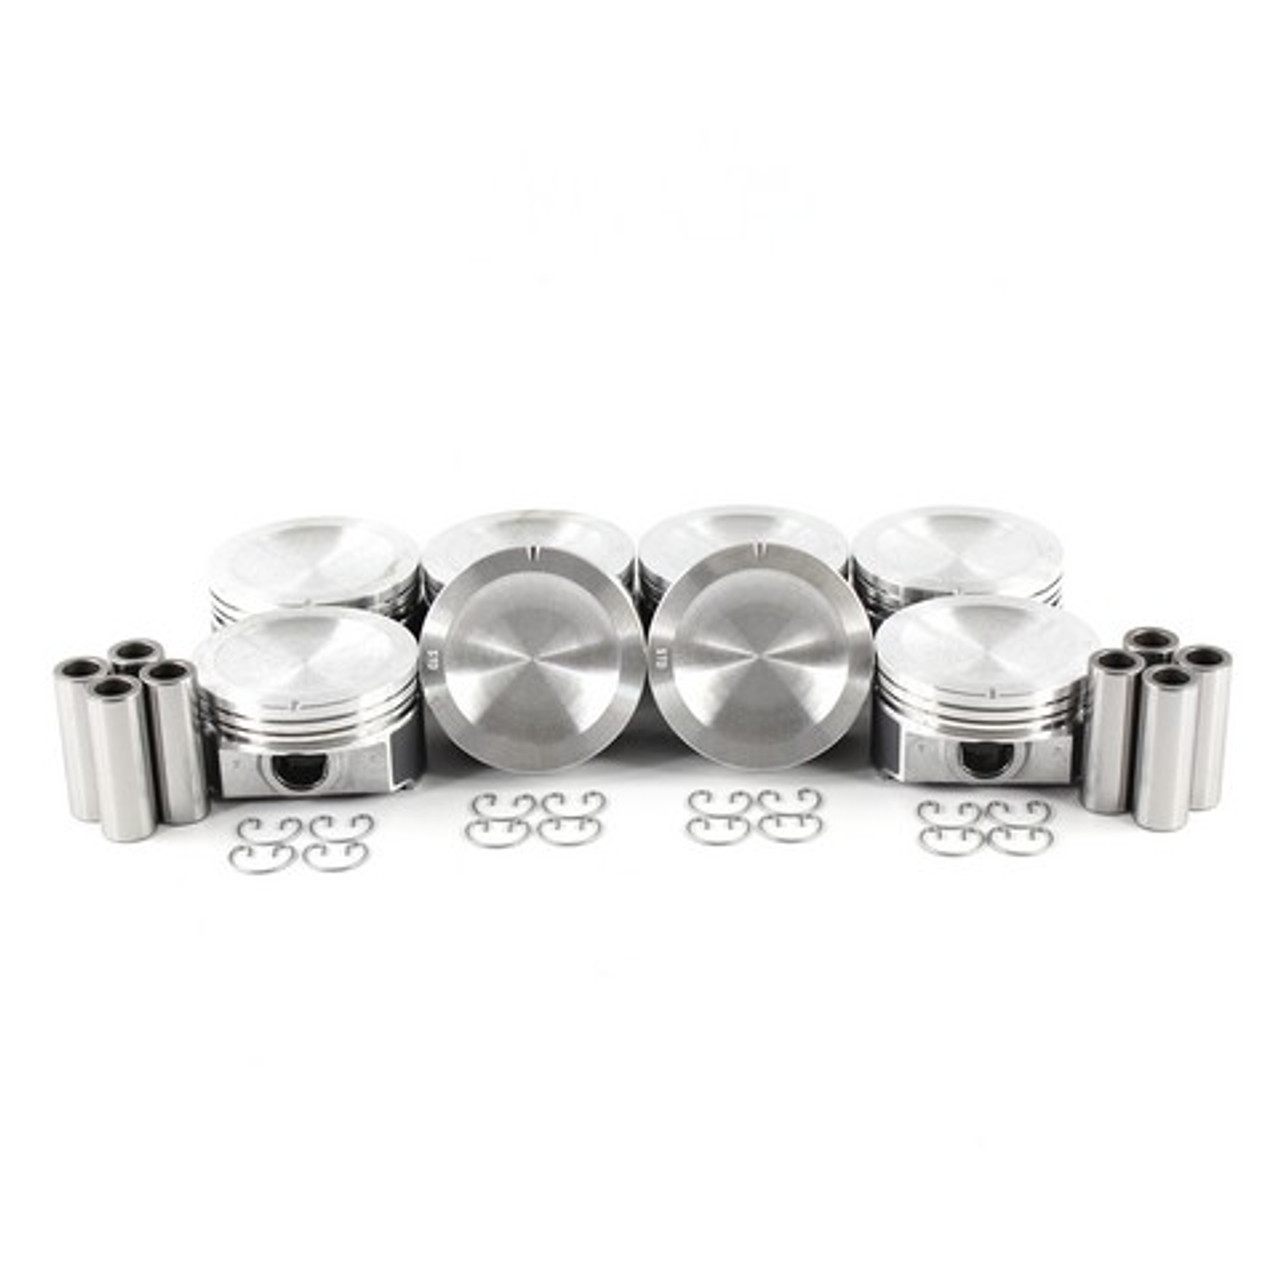 Piston Set 4.6L 2001 Ford Expedition - P4149.29